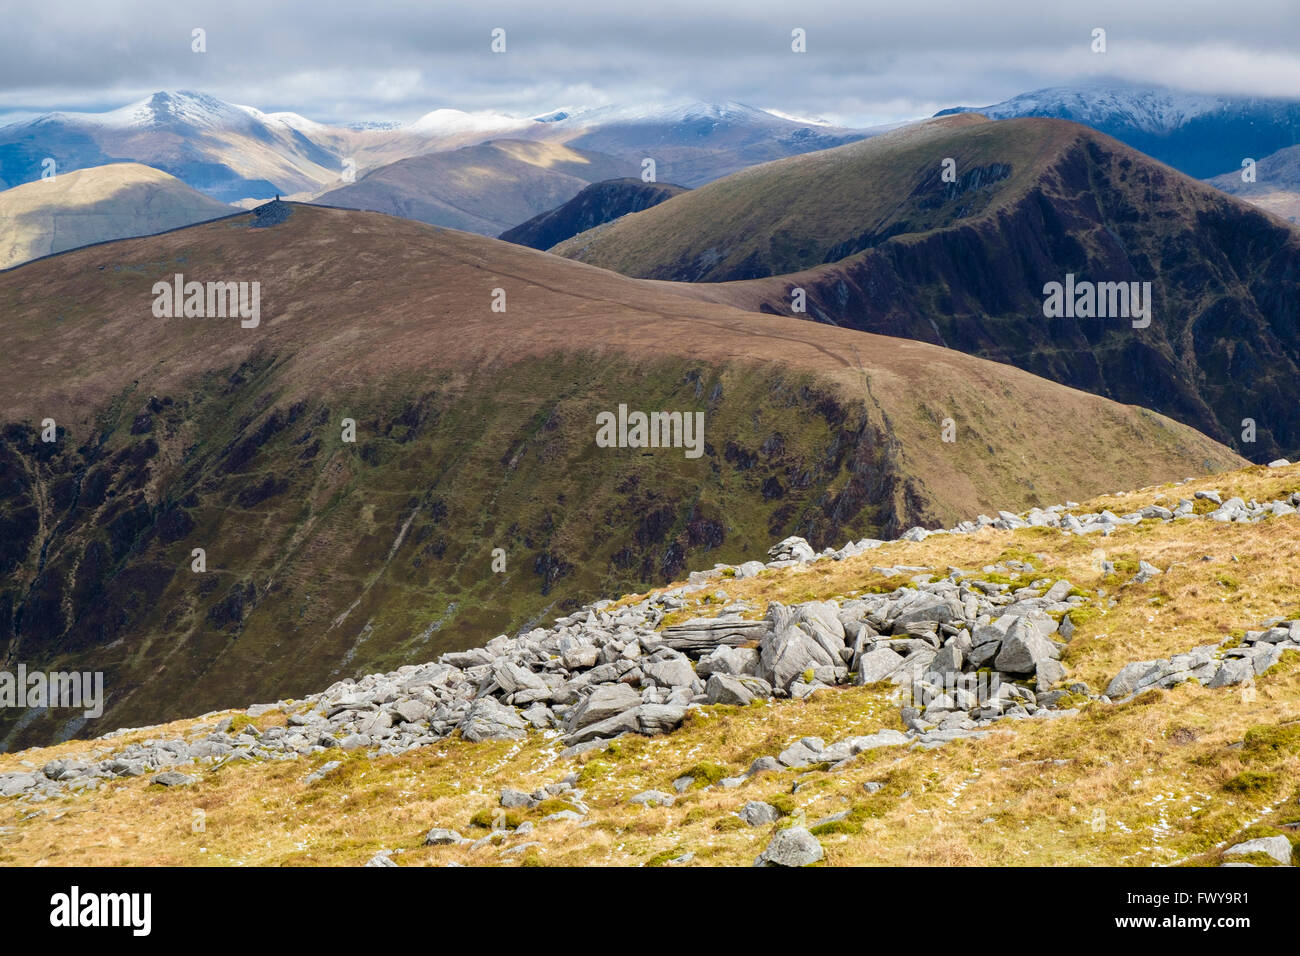 Snowdonia landscape view from Craig Cwm Silyn to Mynydd Tal-y-mgnedd with obelisk on Nantlle Ridge in Snowdonia National Park mountains Eryri Wales UK Stock Photo